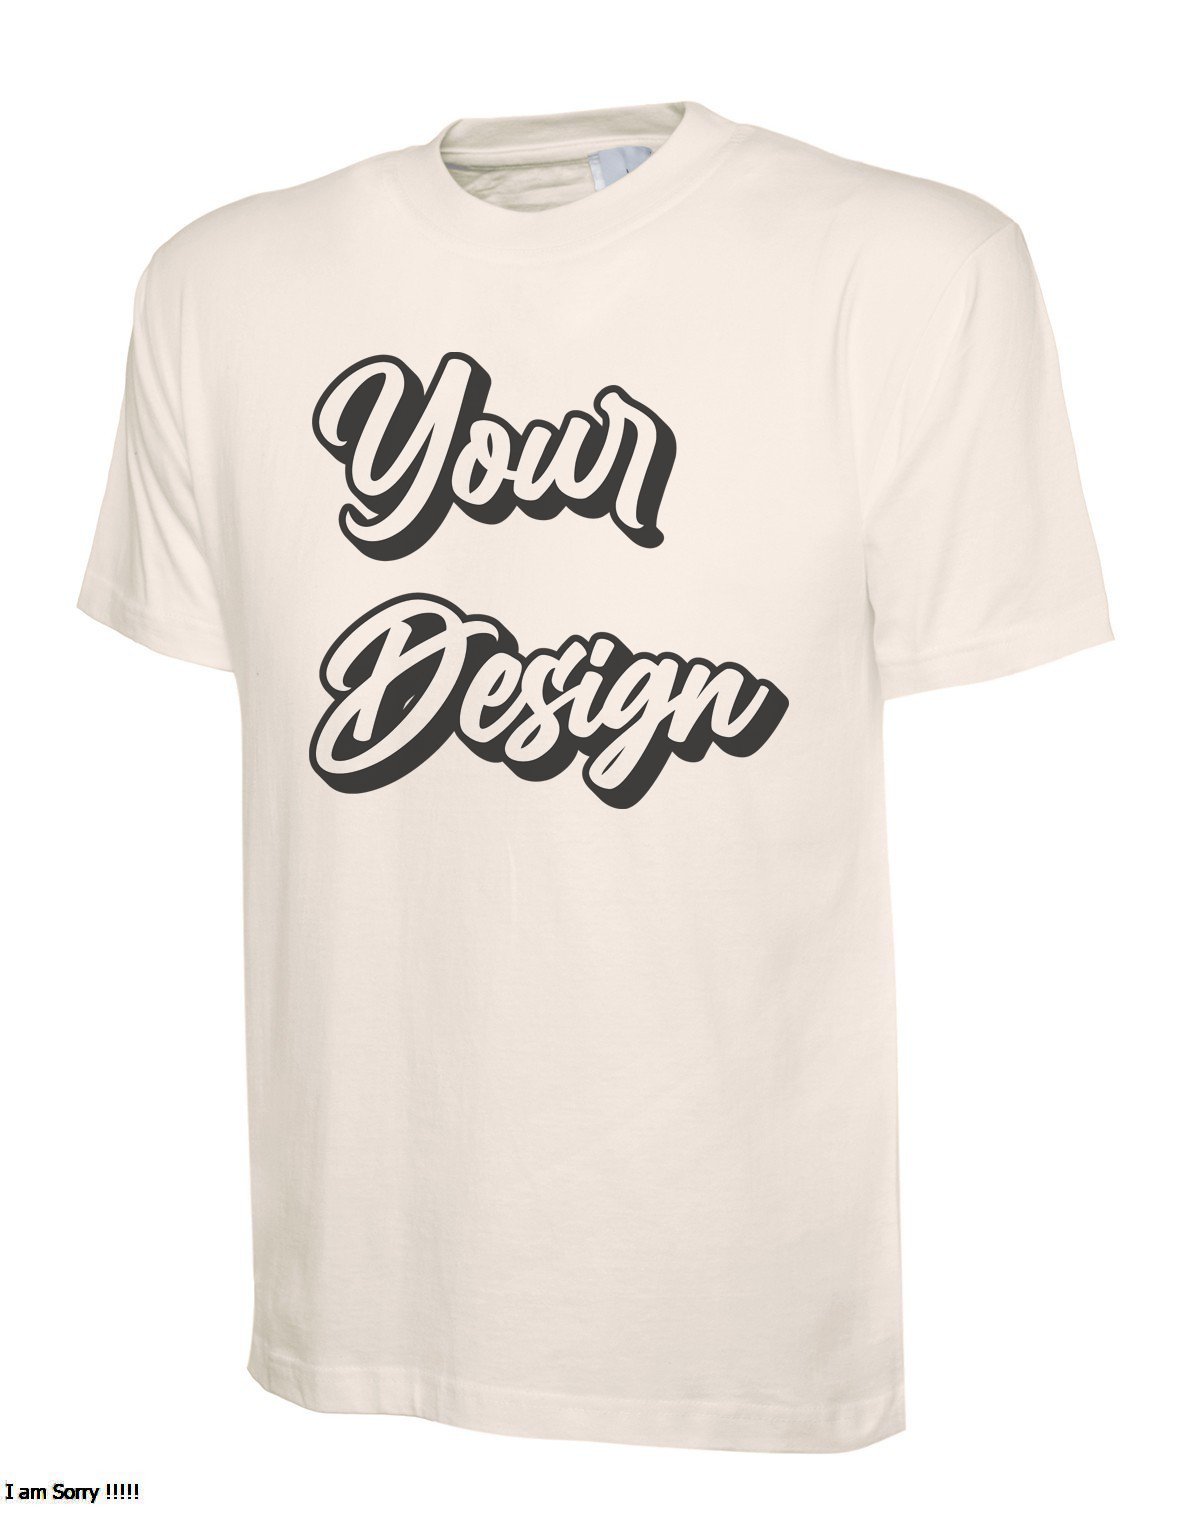 Design Your Own T-Shirt - Wow T-Shirts